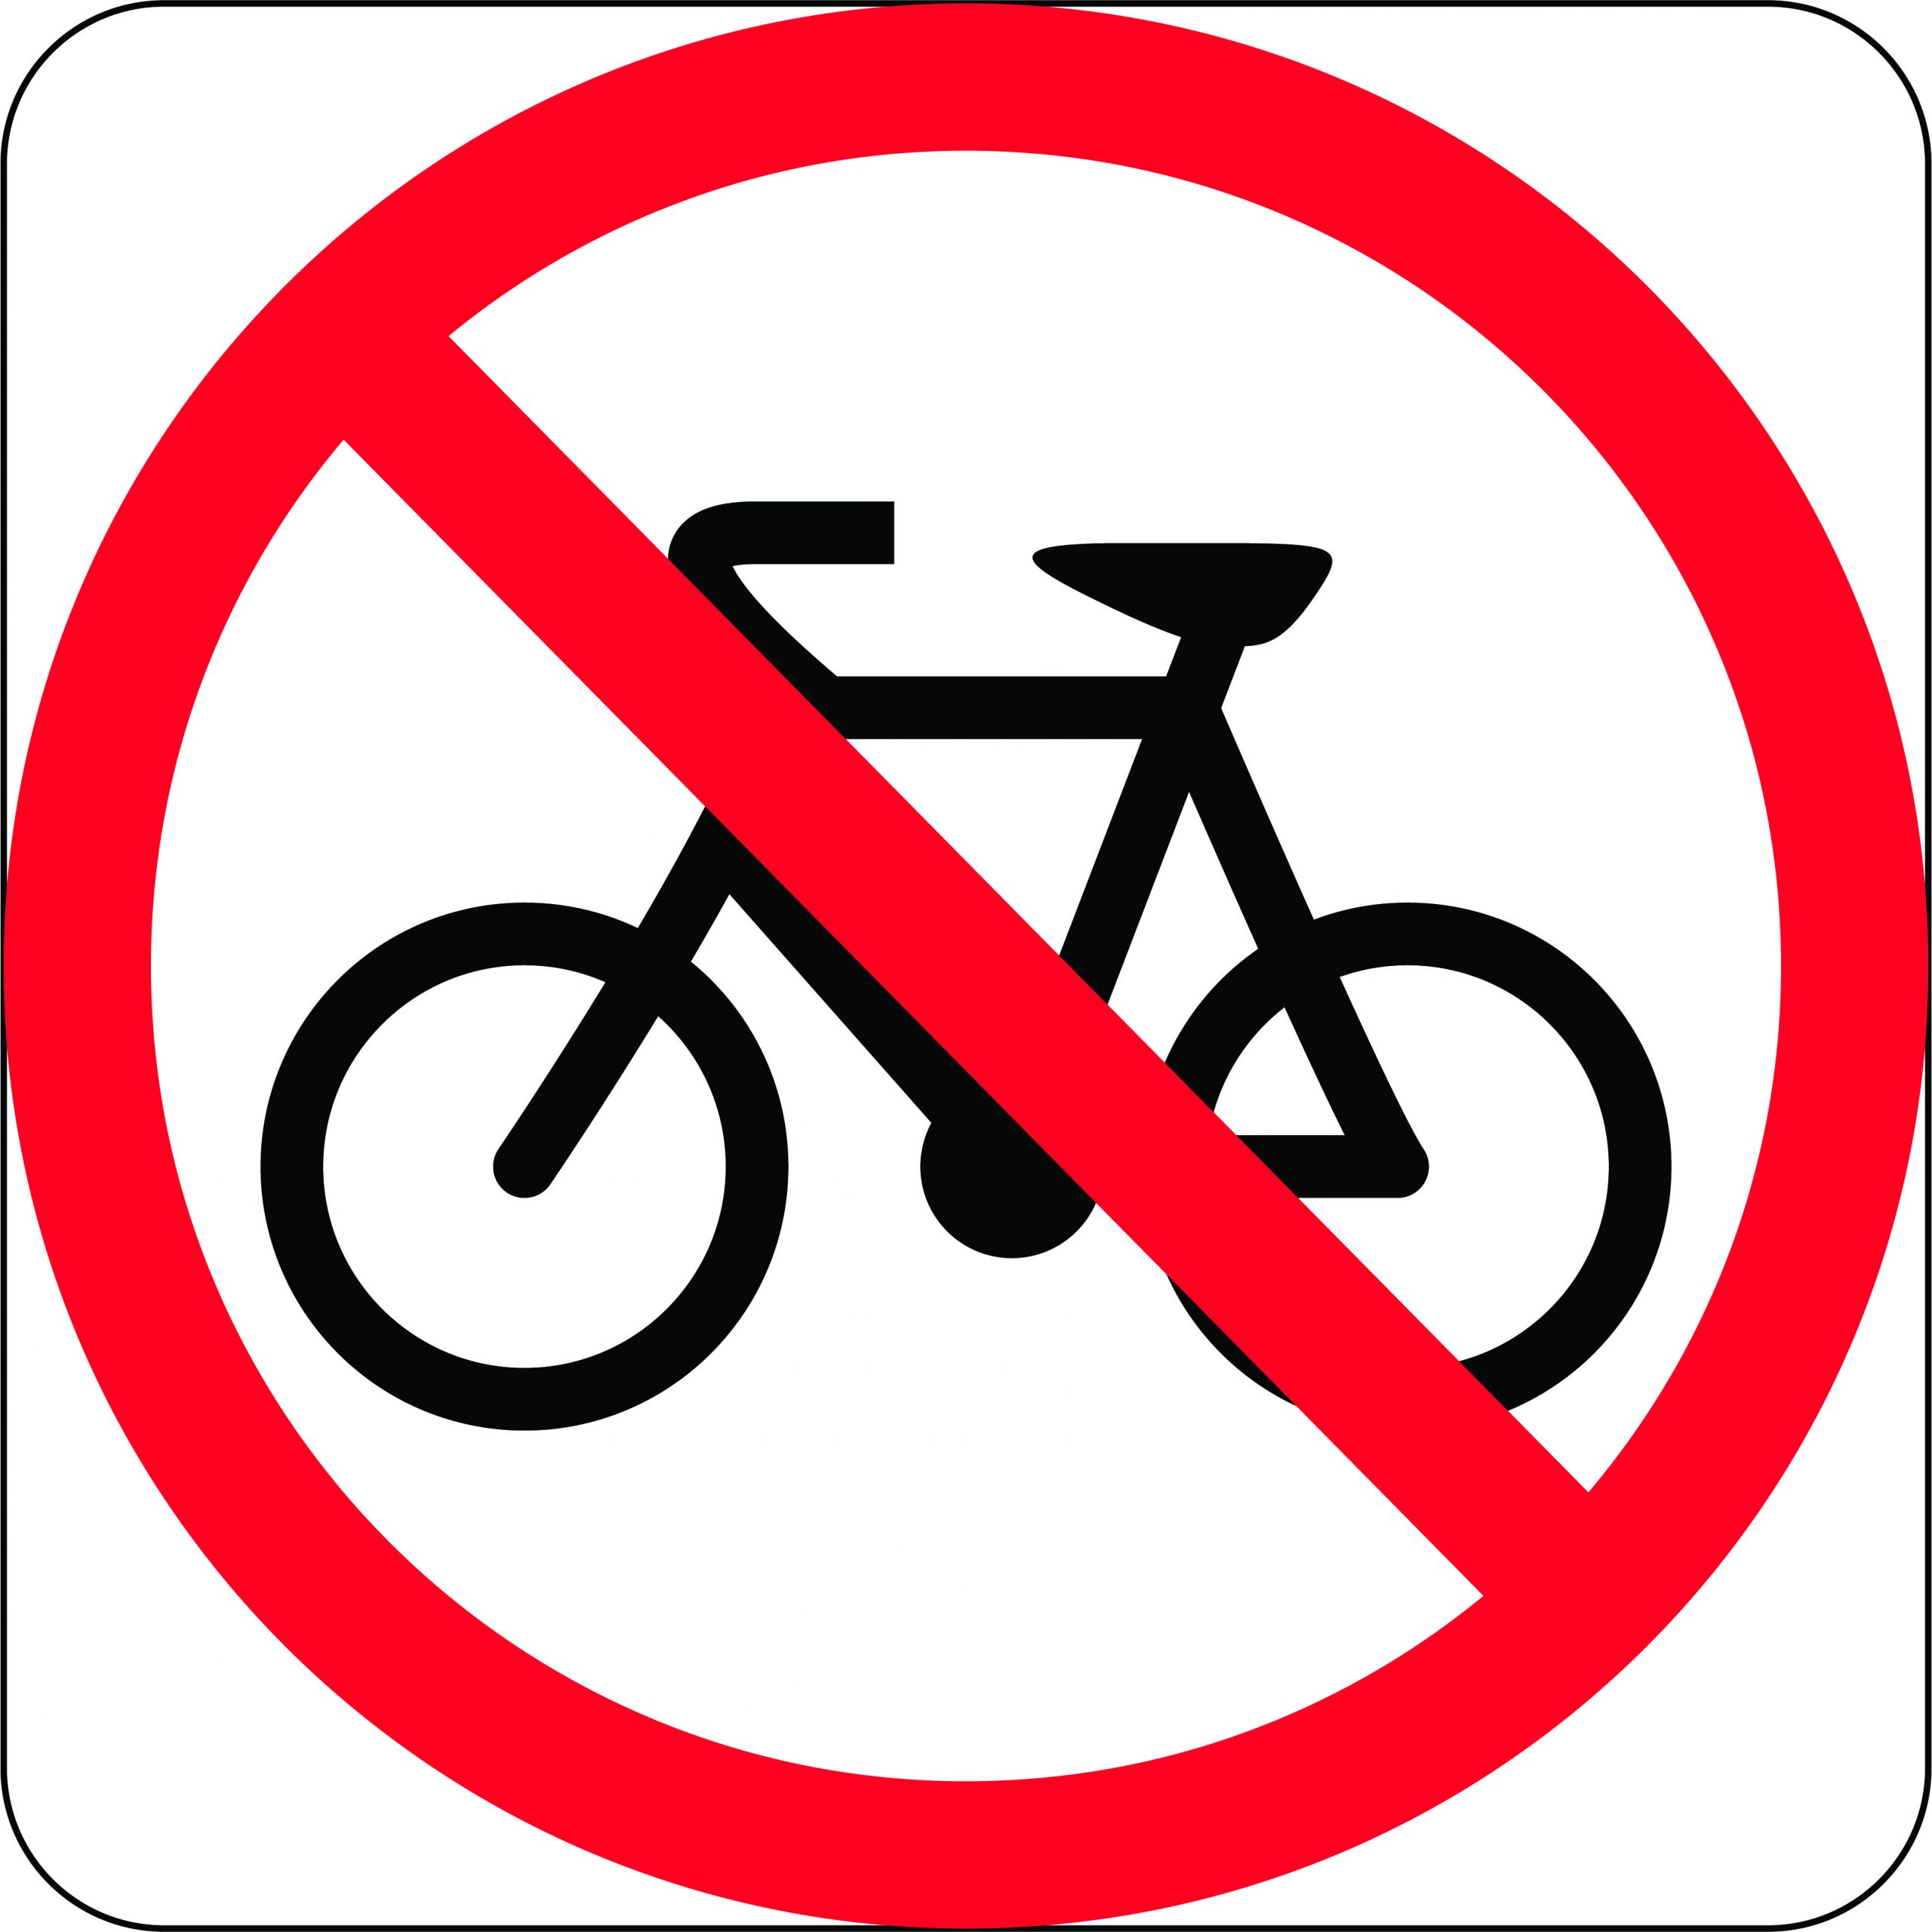 No Bicycles Symbol in Roundel - R6 10 3 ScaleD